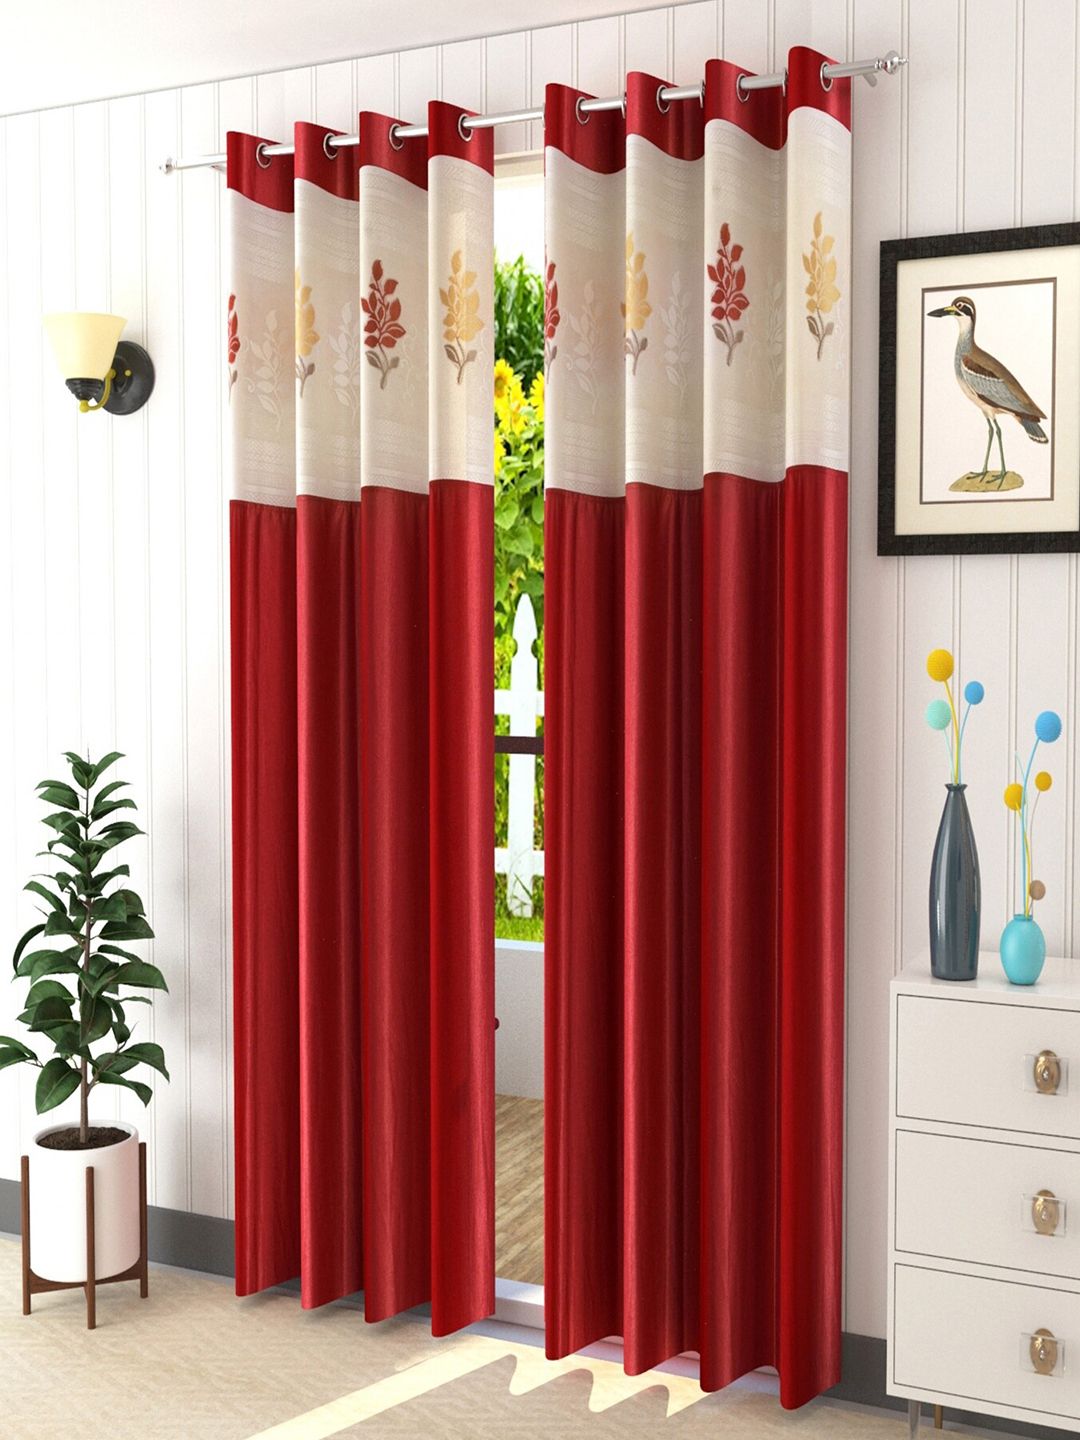 Homefab India Maroon & White Set of 2 Floral Sheer Window Curtain Price in India